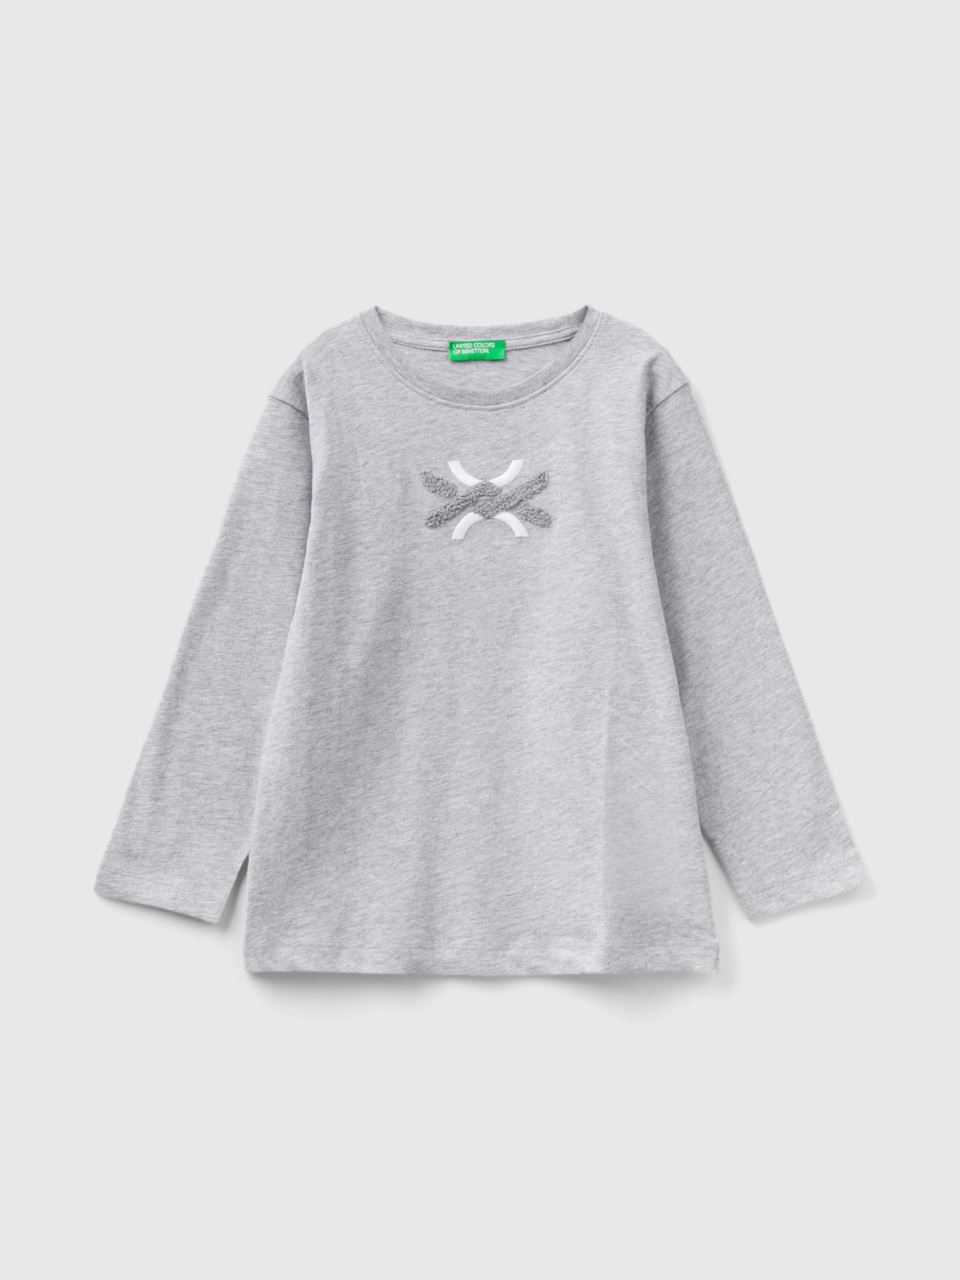 Benetton, T-shirt With Terry Embroidery, Gray, Kids